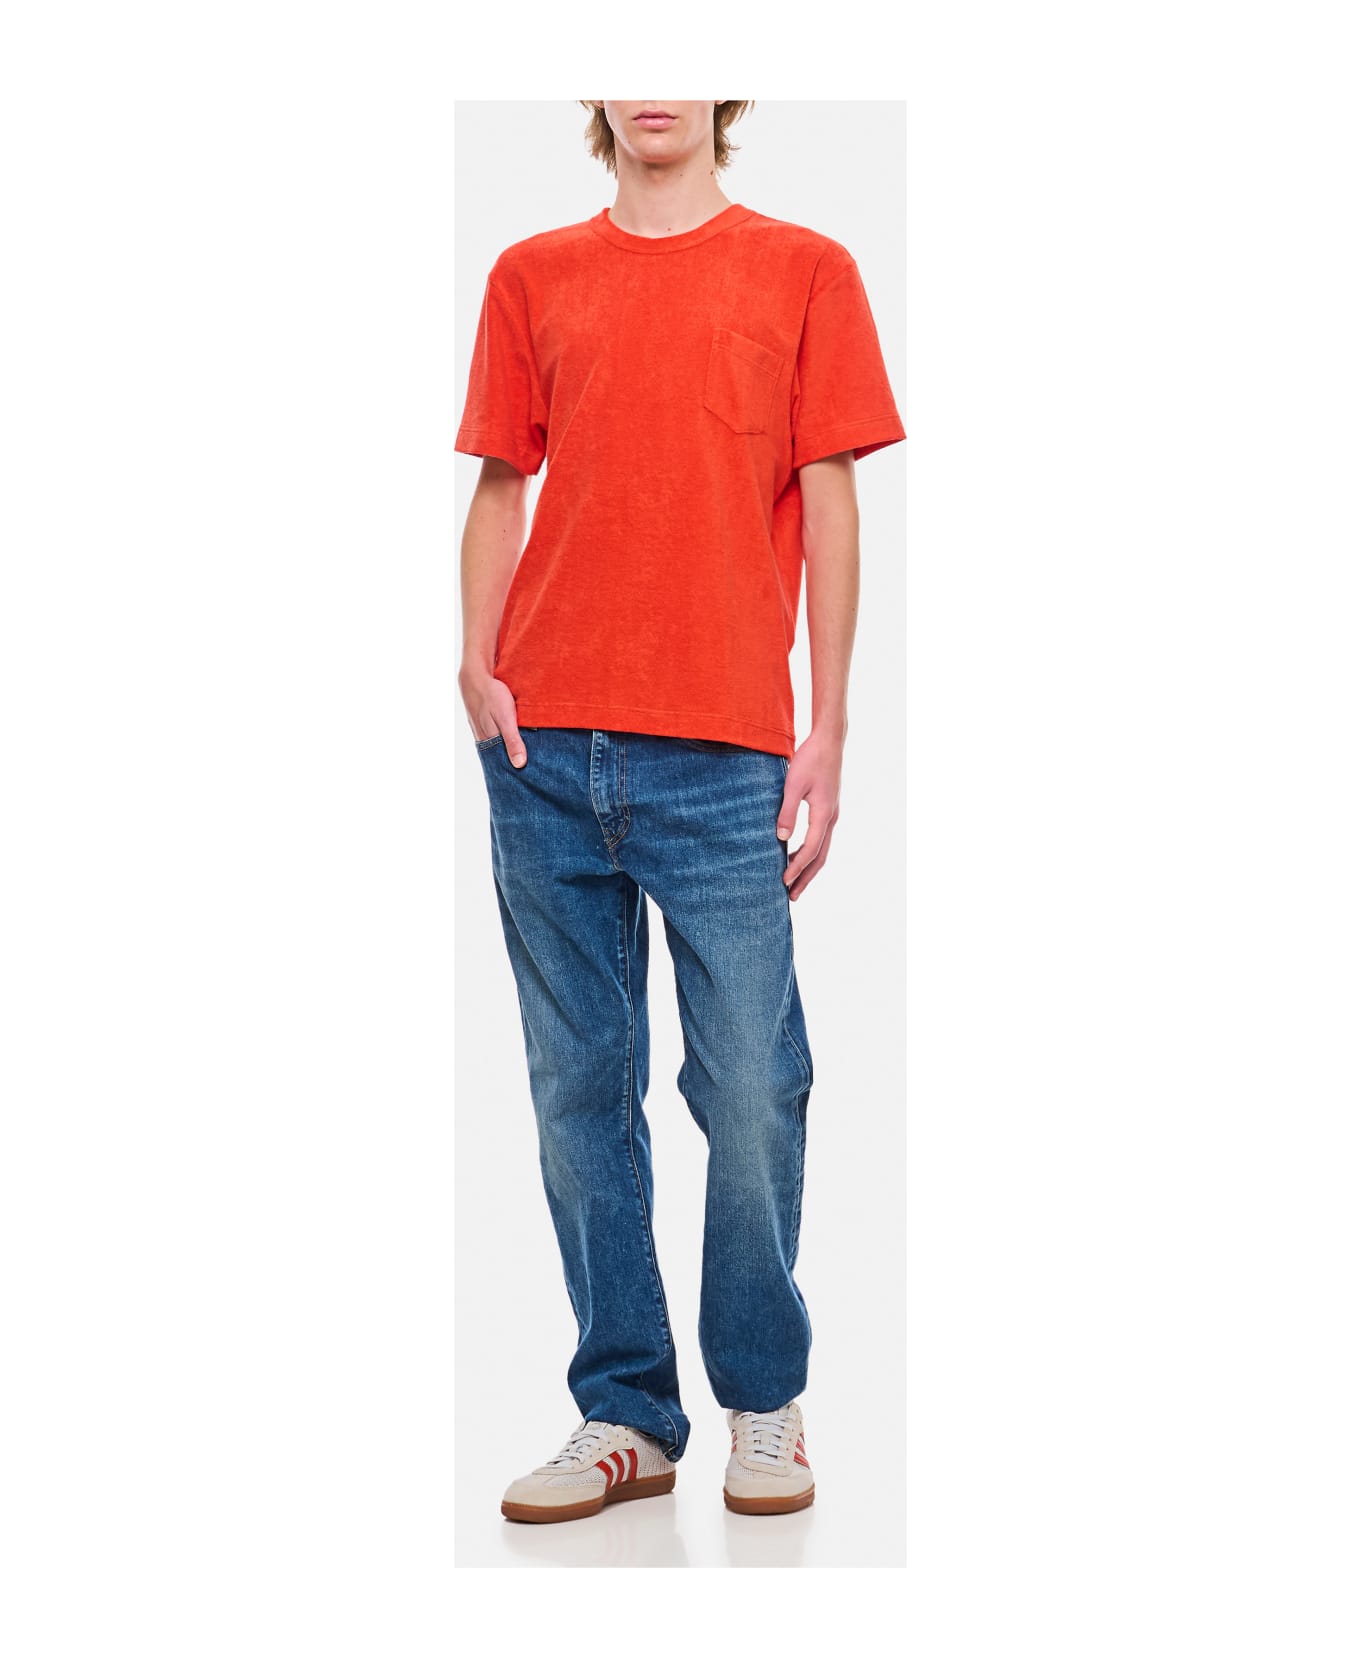 Howlin Shortsleeve Terry T-shirt - Red シャツ